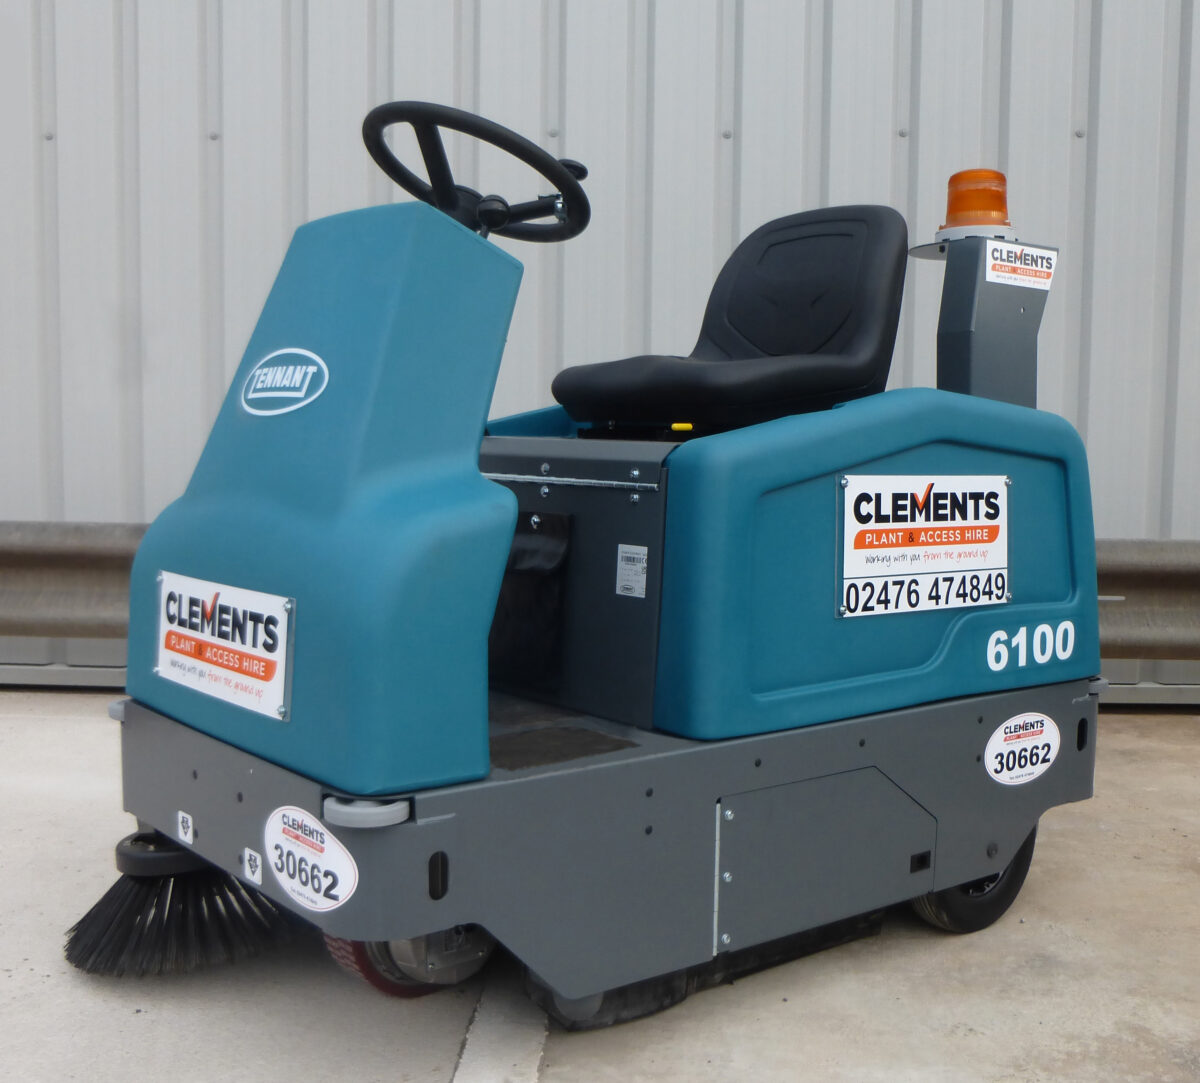 Floor Sweeper Cleaner Hire in Coventry from Clements Plant & Access Hire.